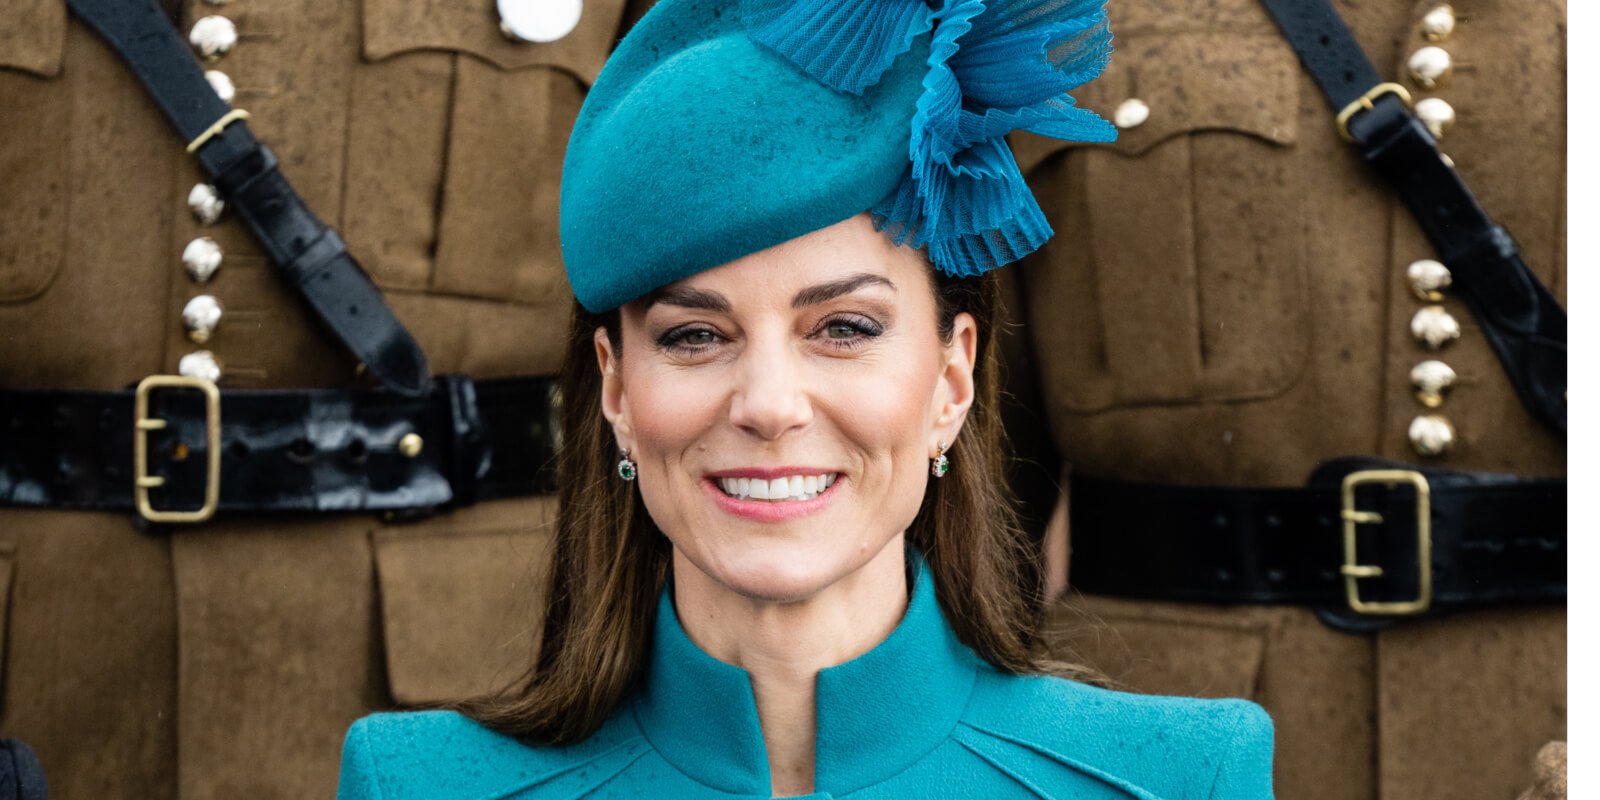 Kate Middleton has stepped into a more prominent royal role over the past several years.